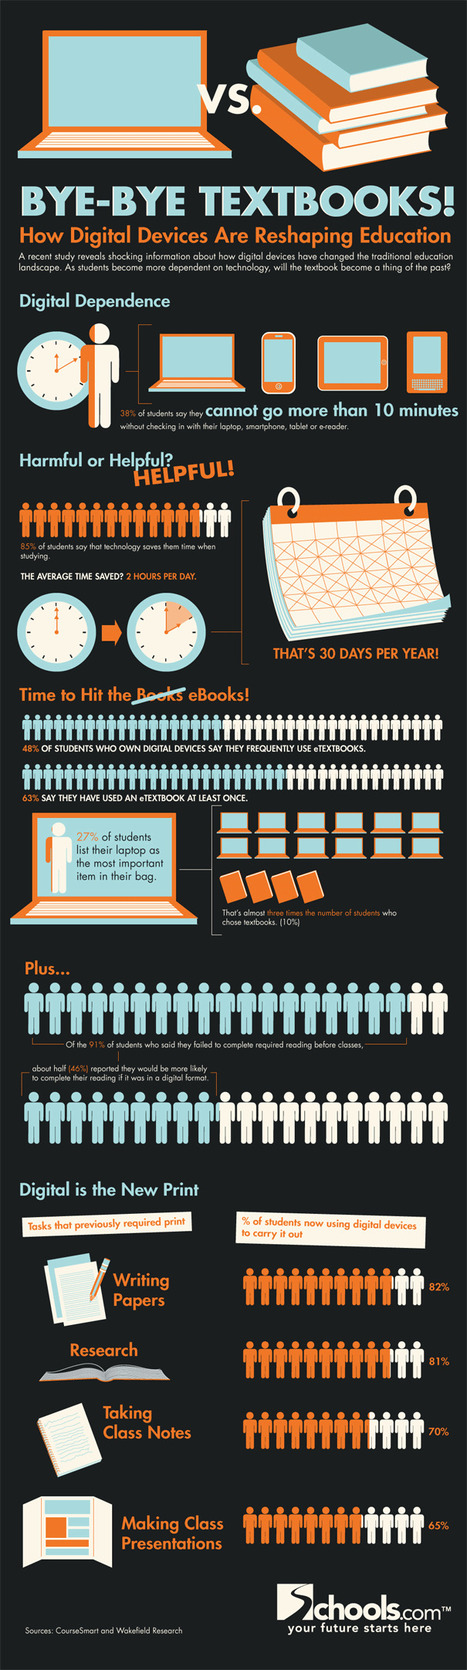 Bye-Bye Textbooks! How Digital Devices Are Reshaping Education Infographic | E-Learning-Inclusivo (Mashup) | Scoop.it